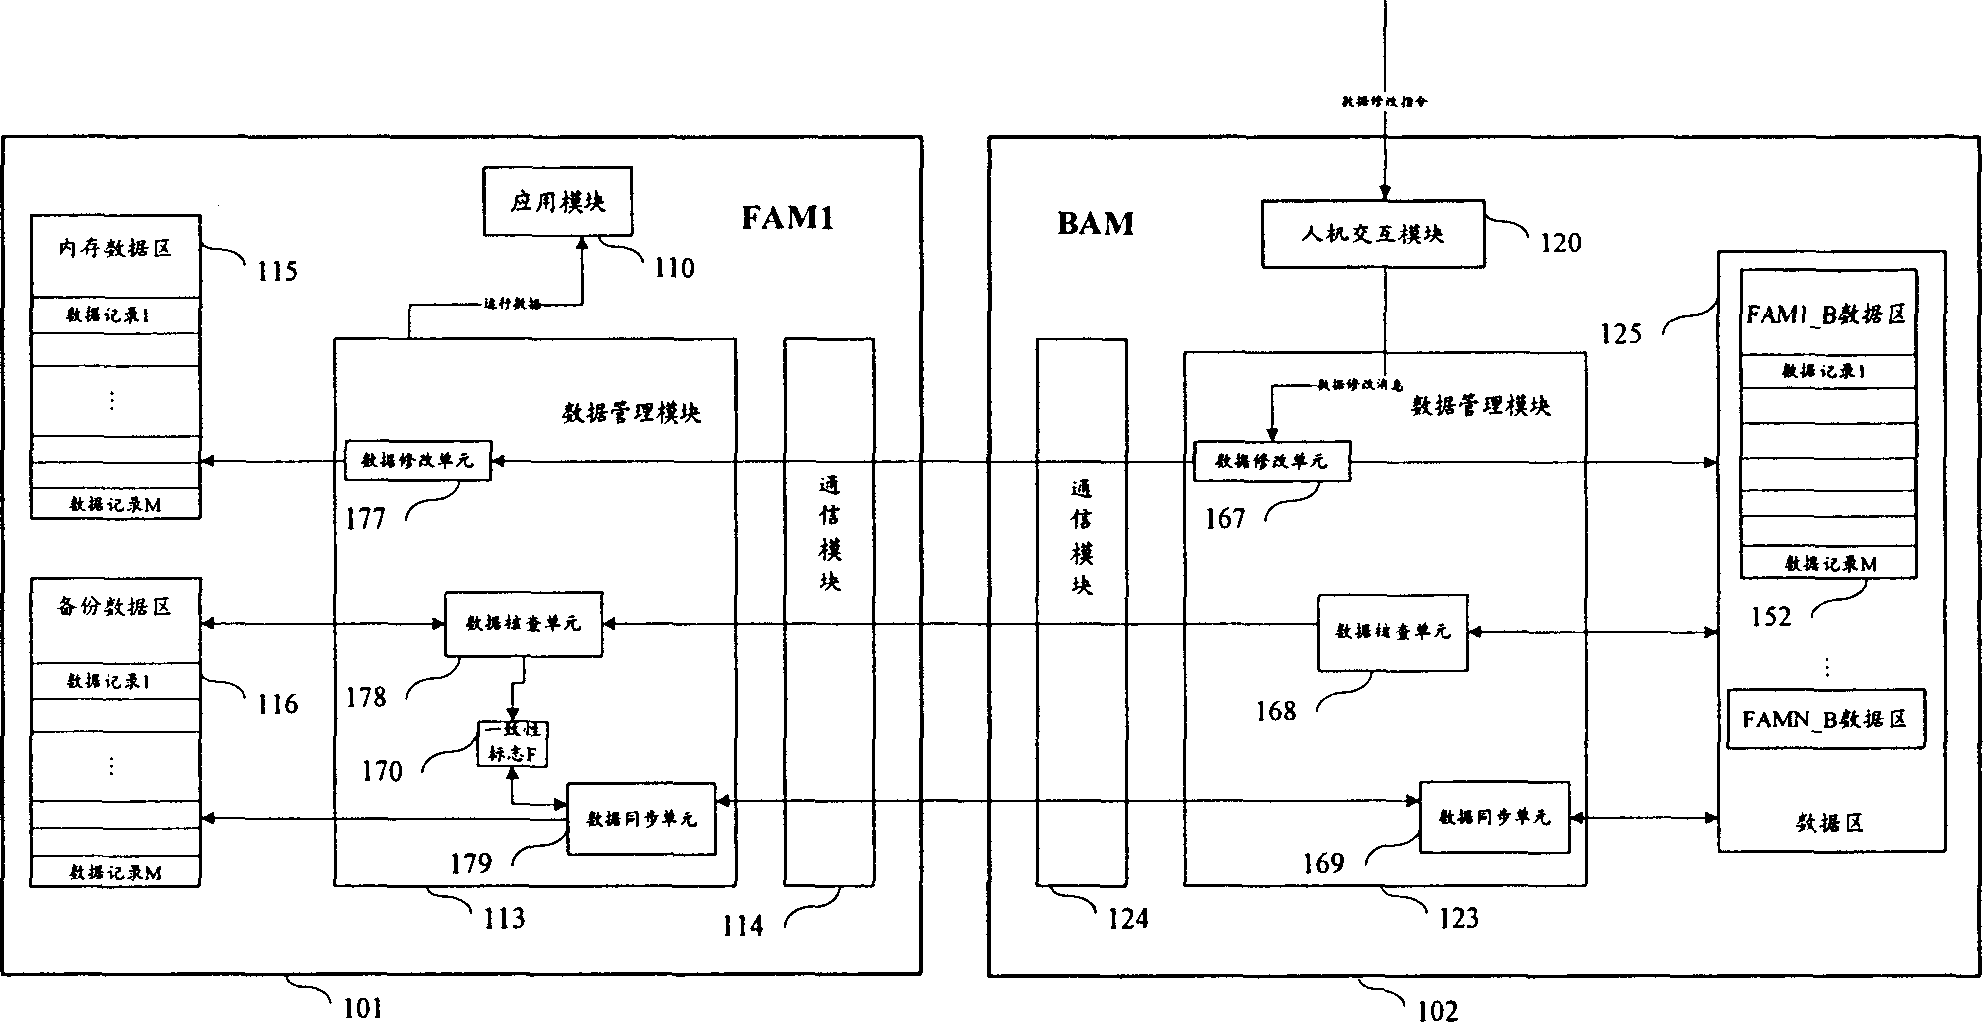 Data management system and method